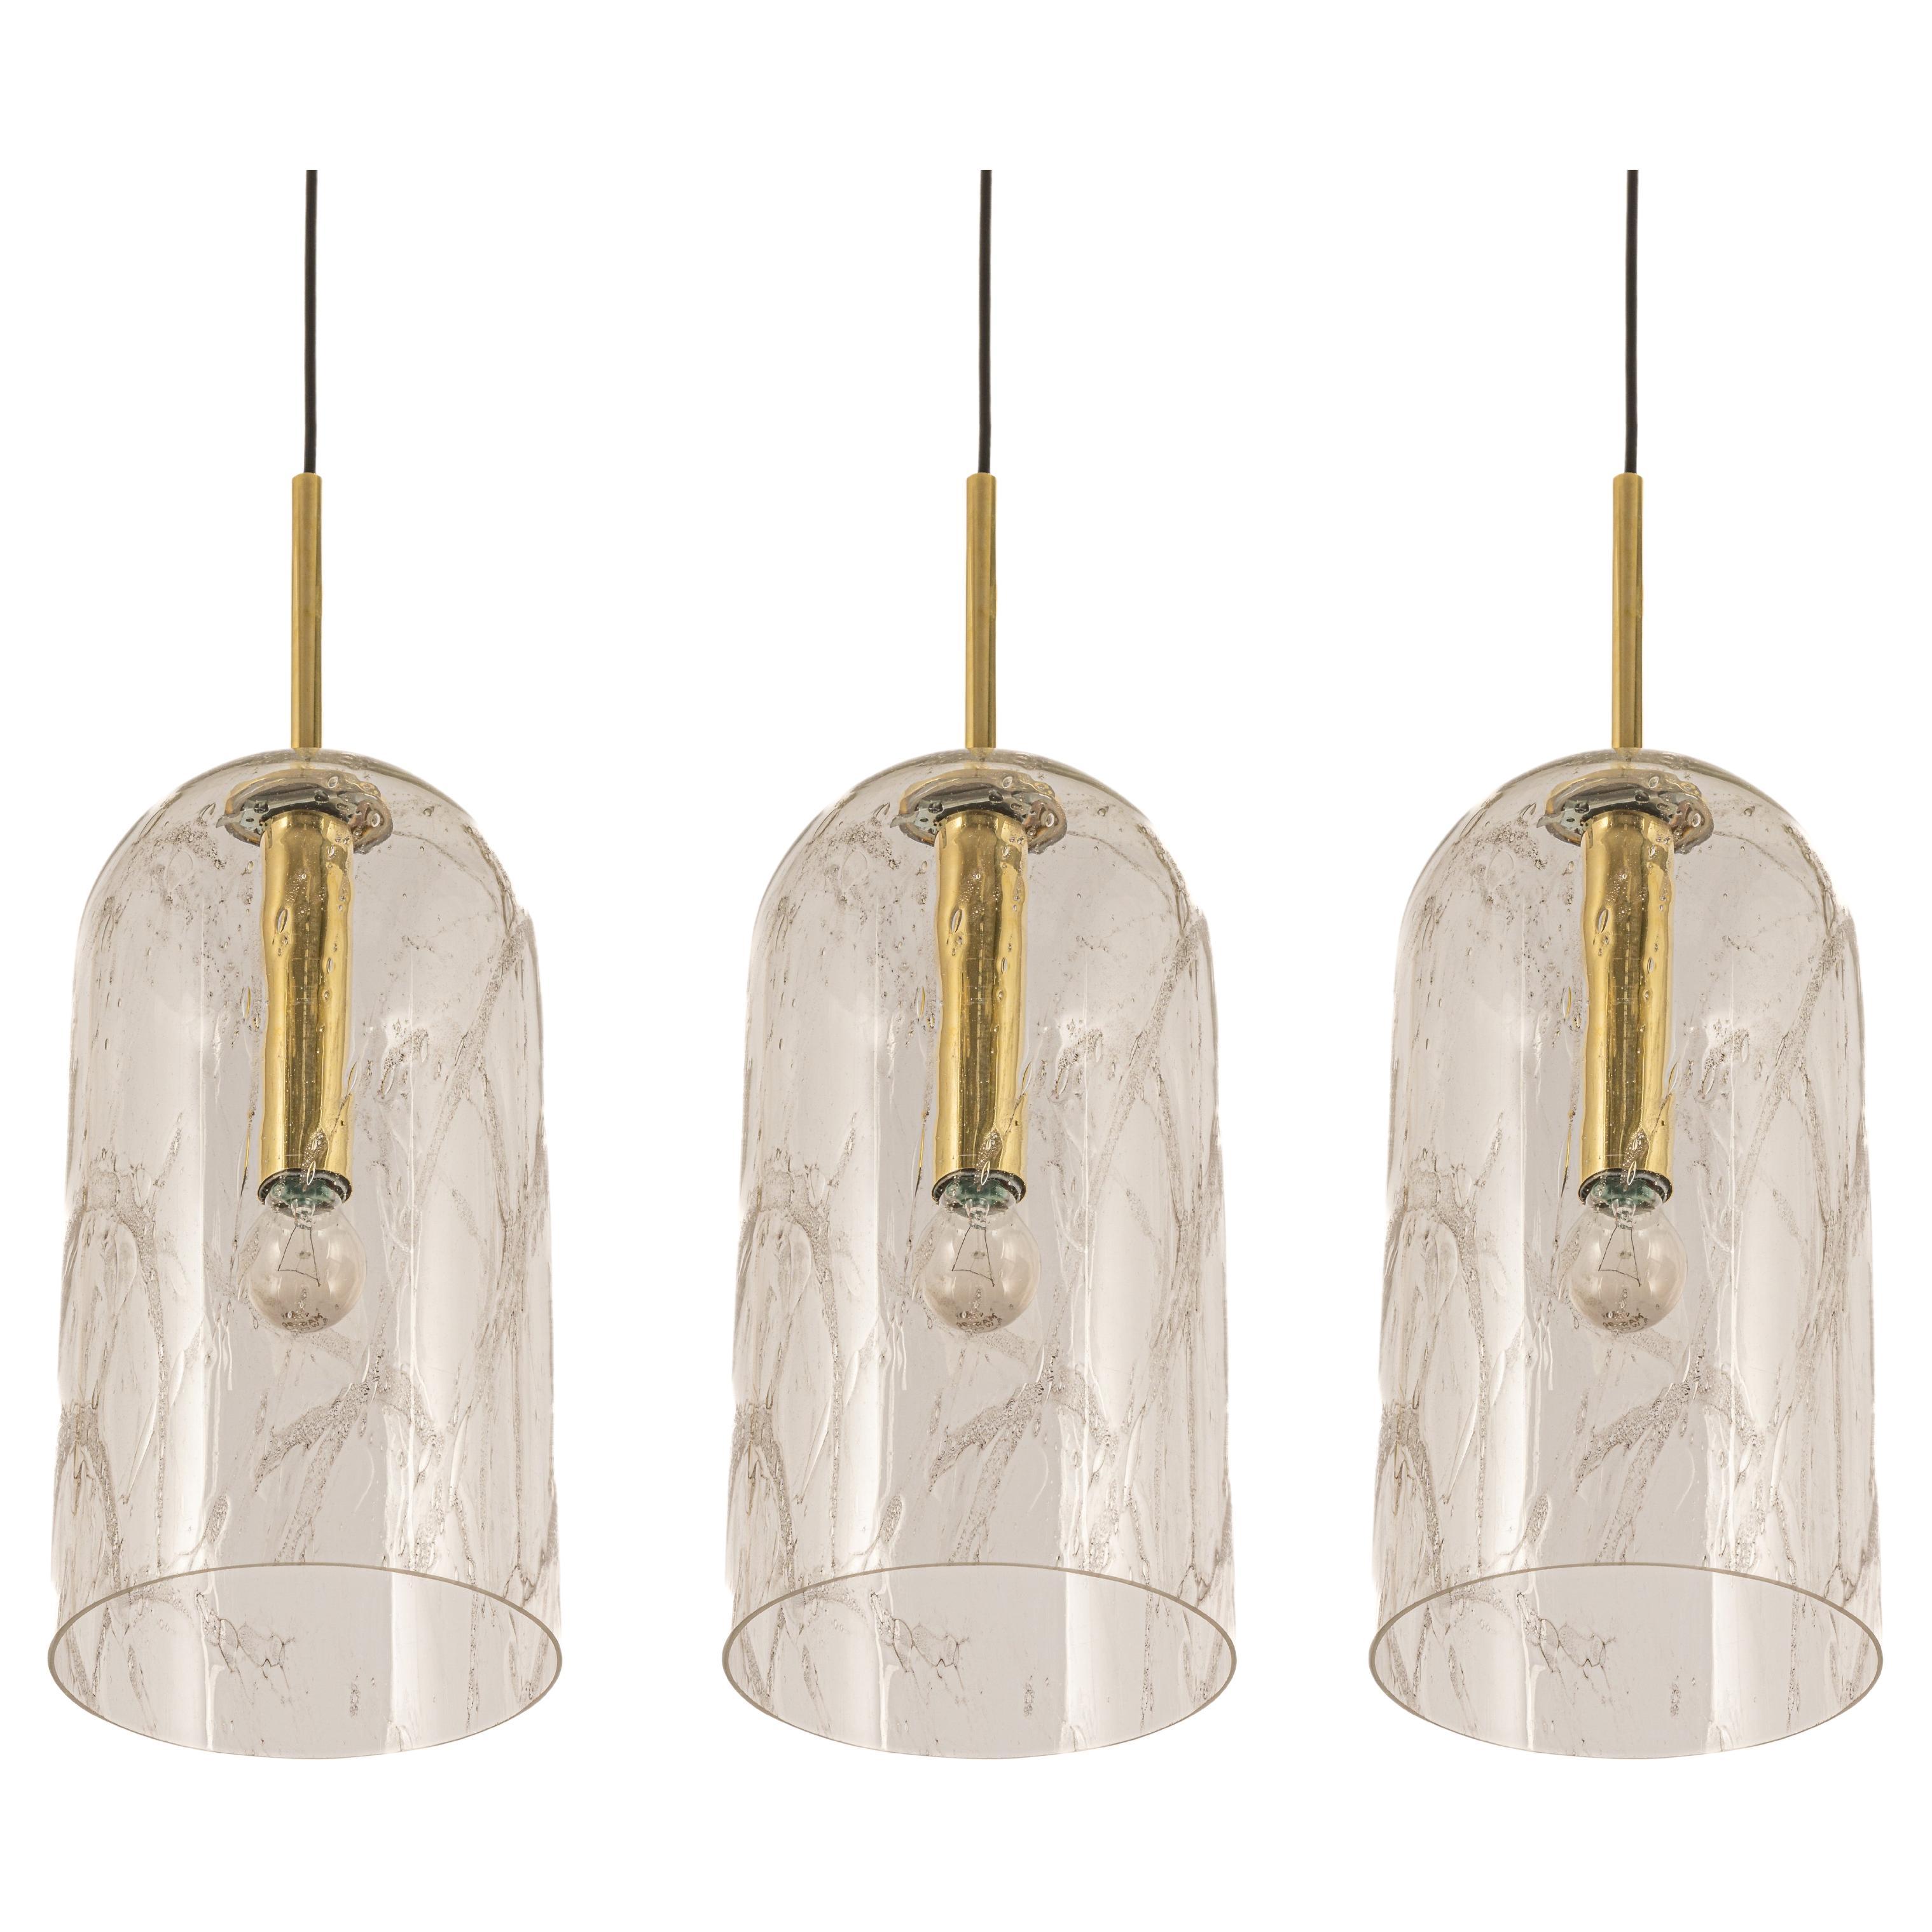 Sef of 3 Large Glass Pendant lights by Limburg, Germany, 1970s For Sale